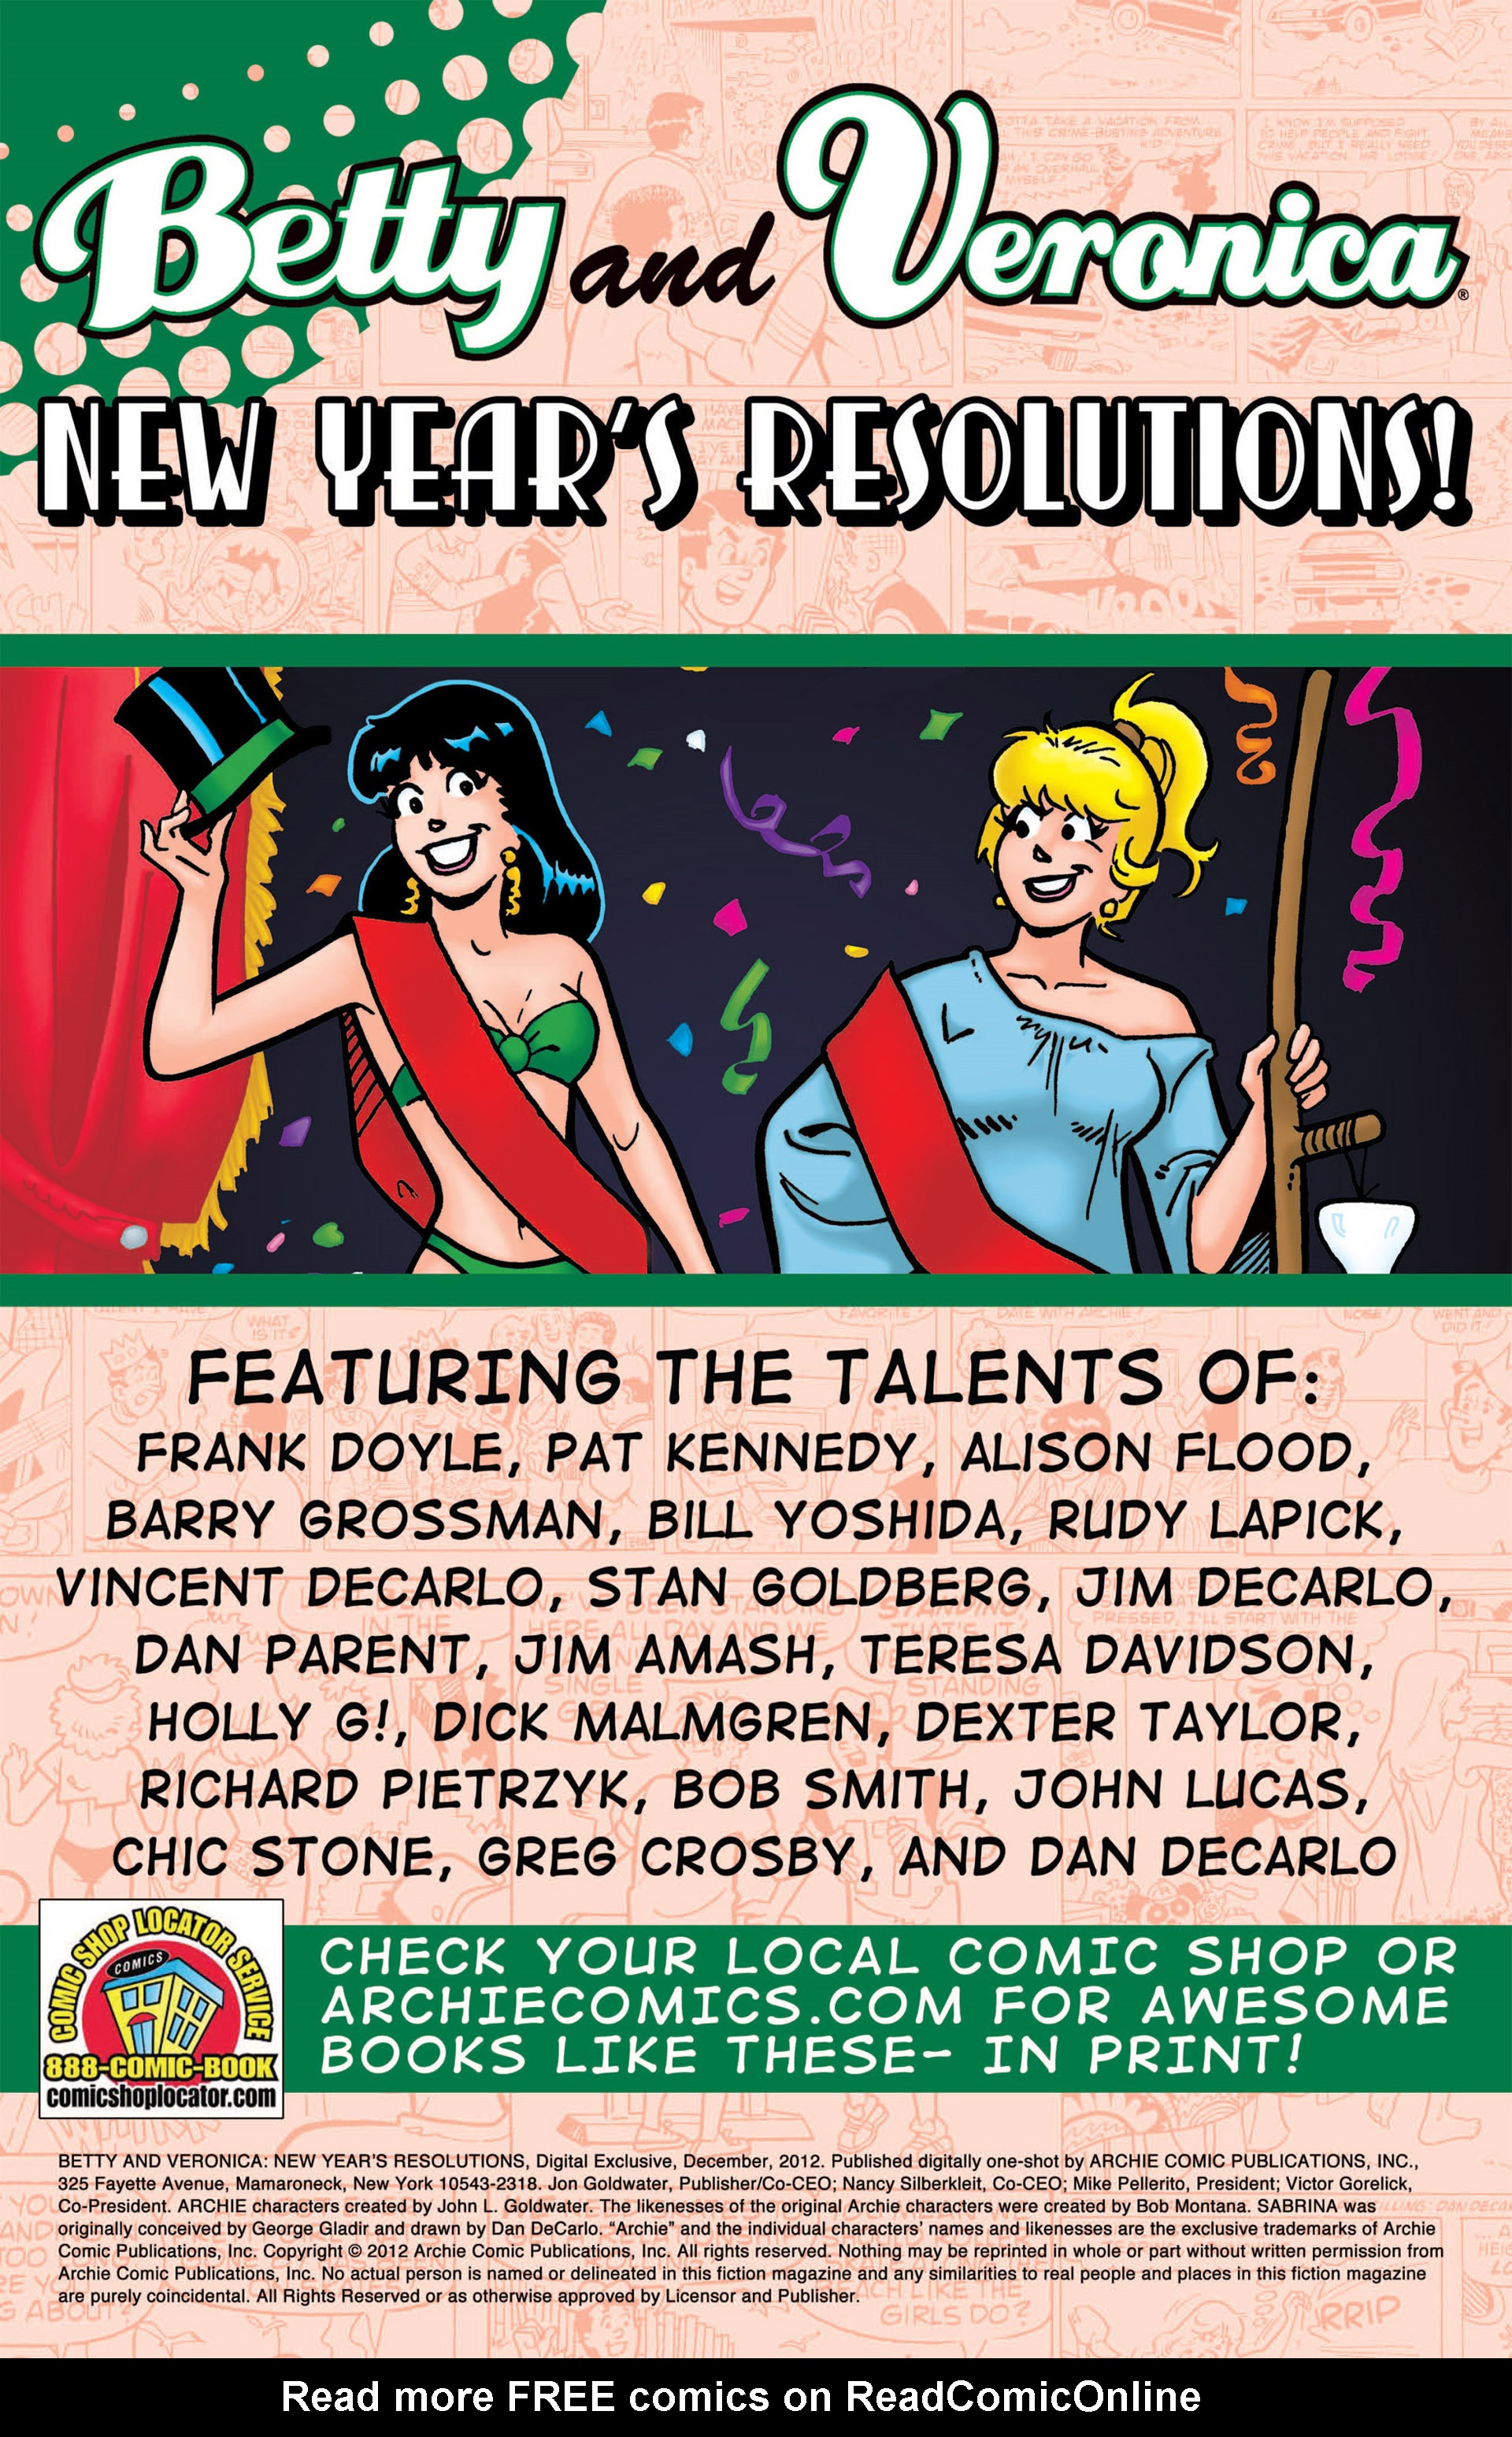 Read online Betty & Veronica New Year's Resolutions comic -  Issue # TPB - 2